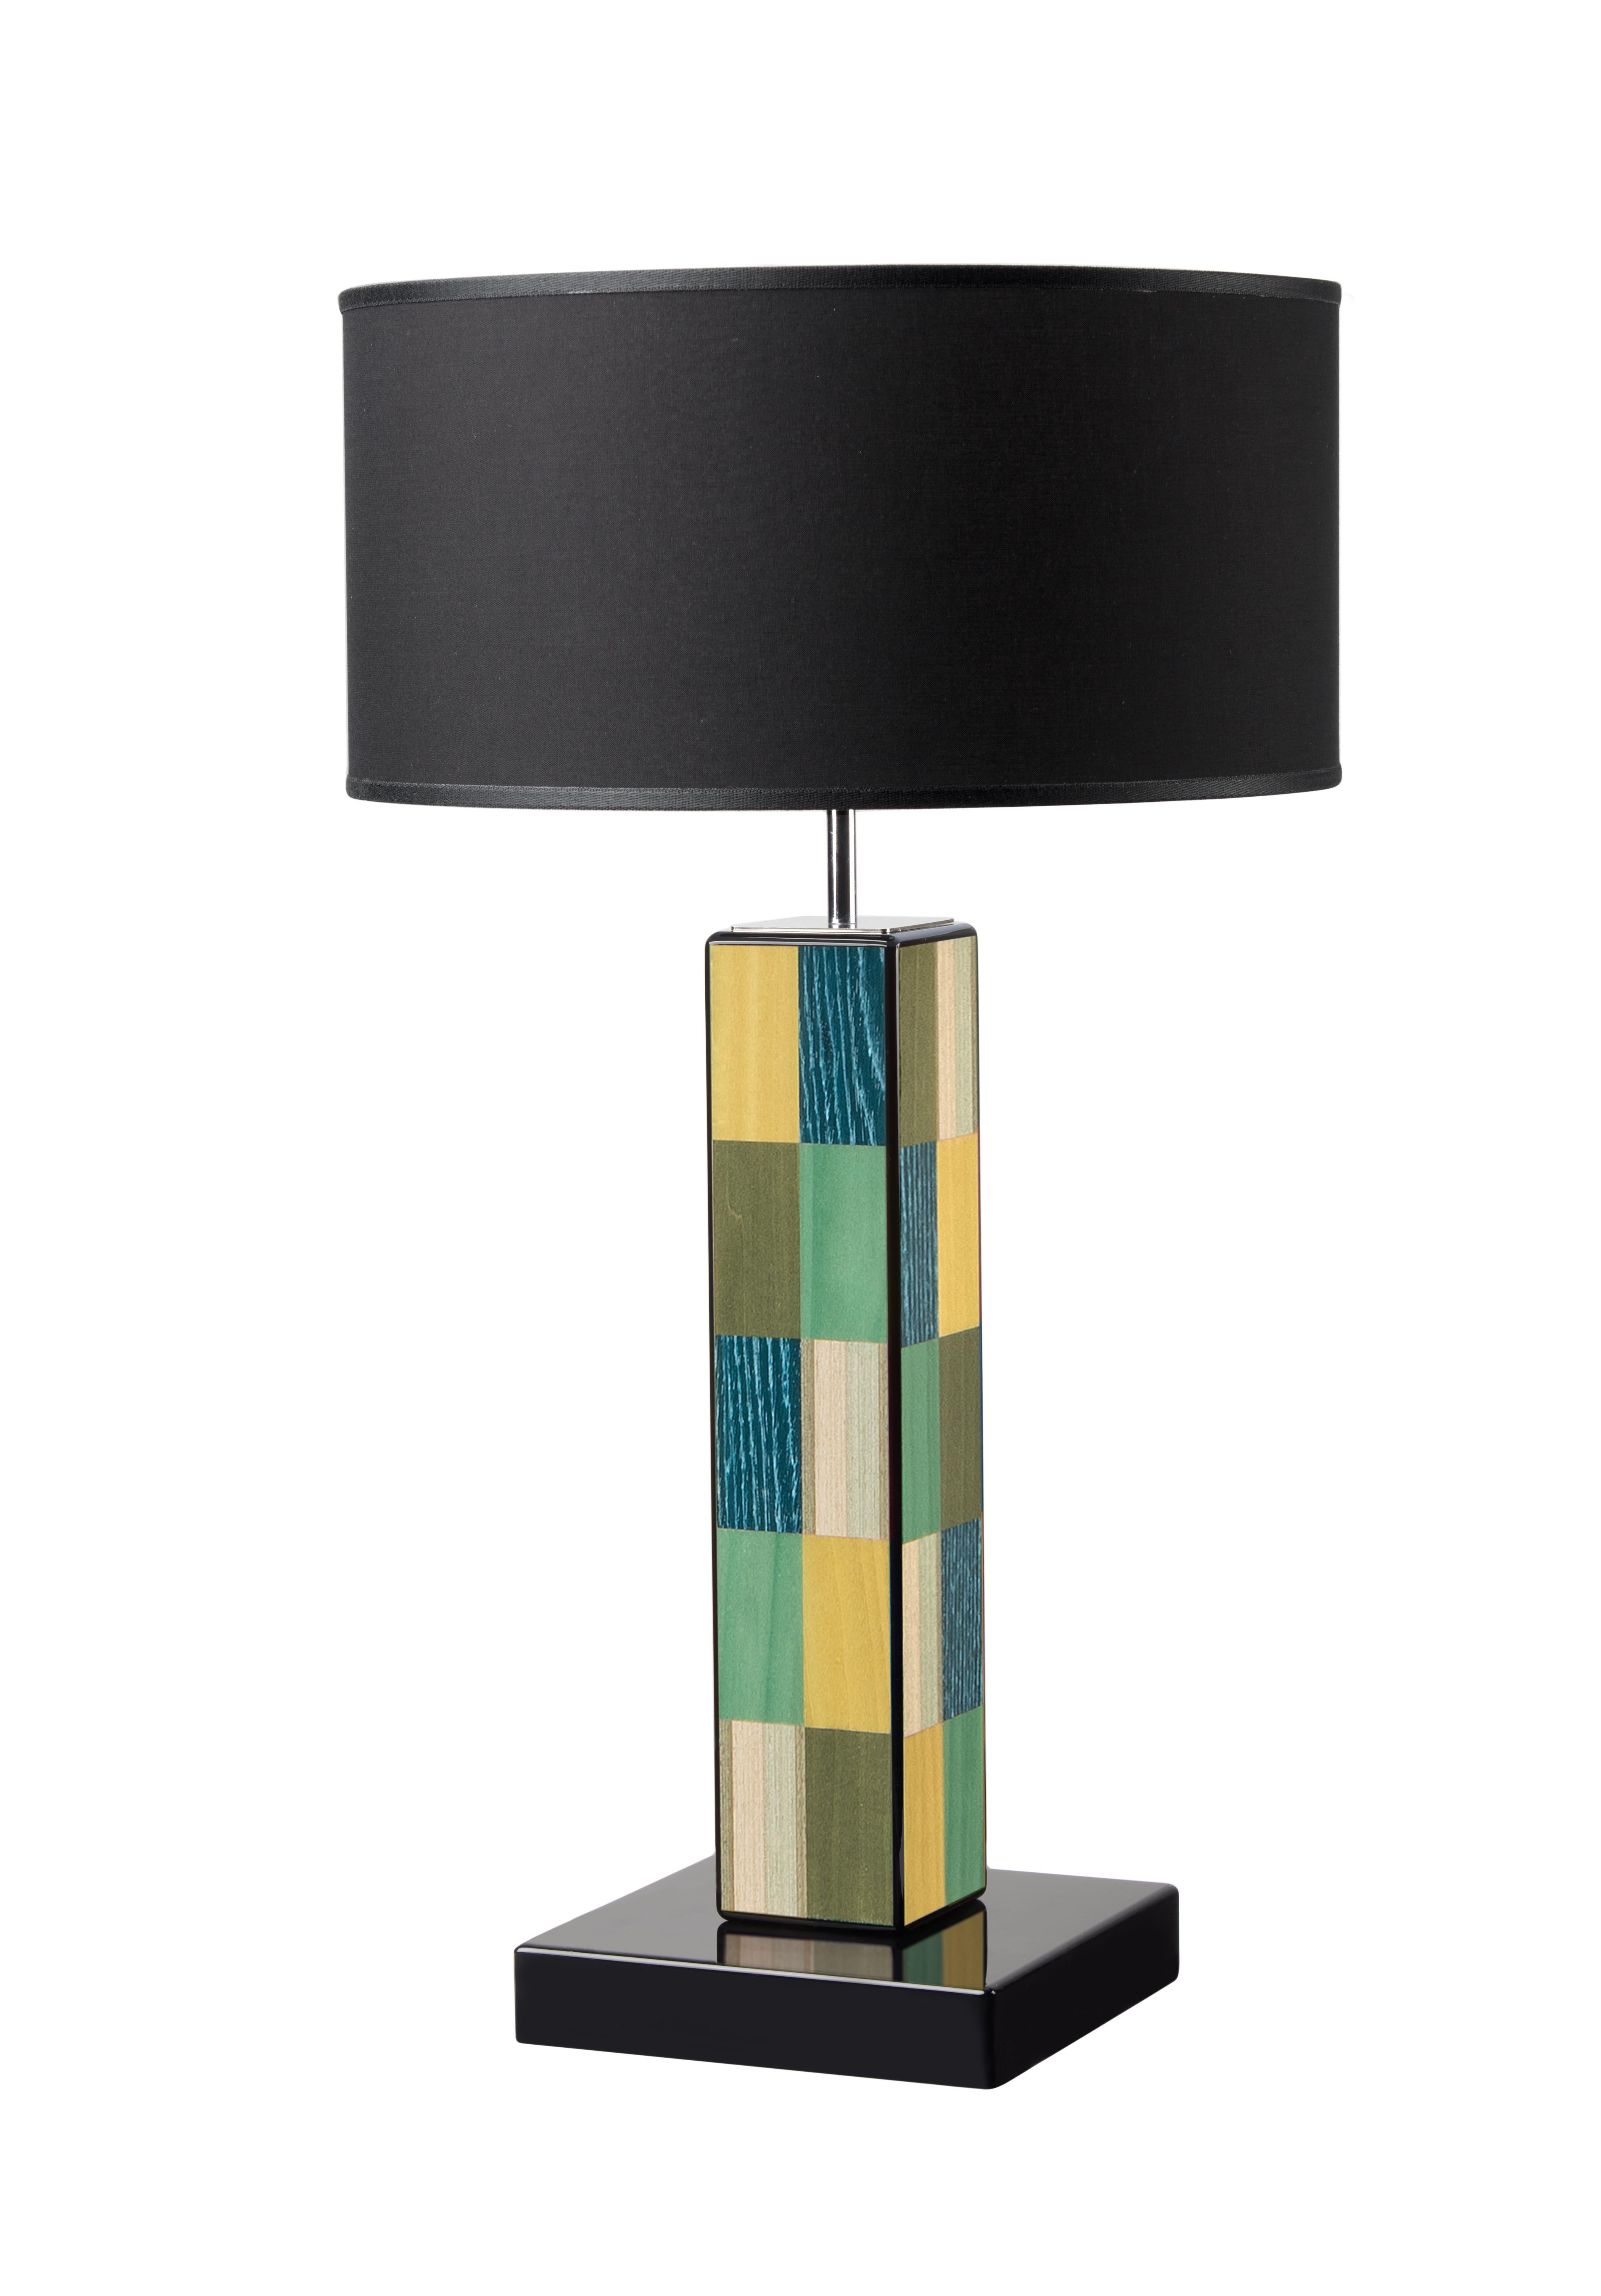 Exquisitely balanced like a modern art painting, this table lamp is composed of sleek, geometric lines with bold visual appeal. Handcrafted of wood polished and brushed by hand, and enriched with handmade inlay works of green, blue, and